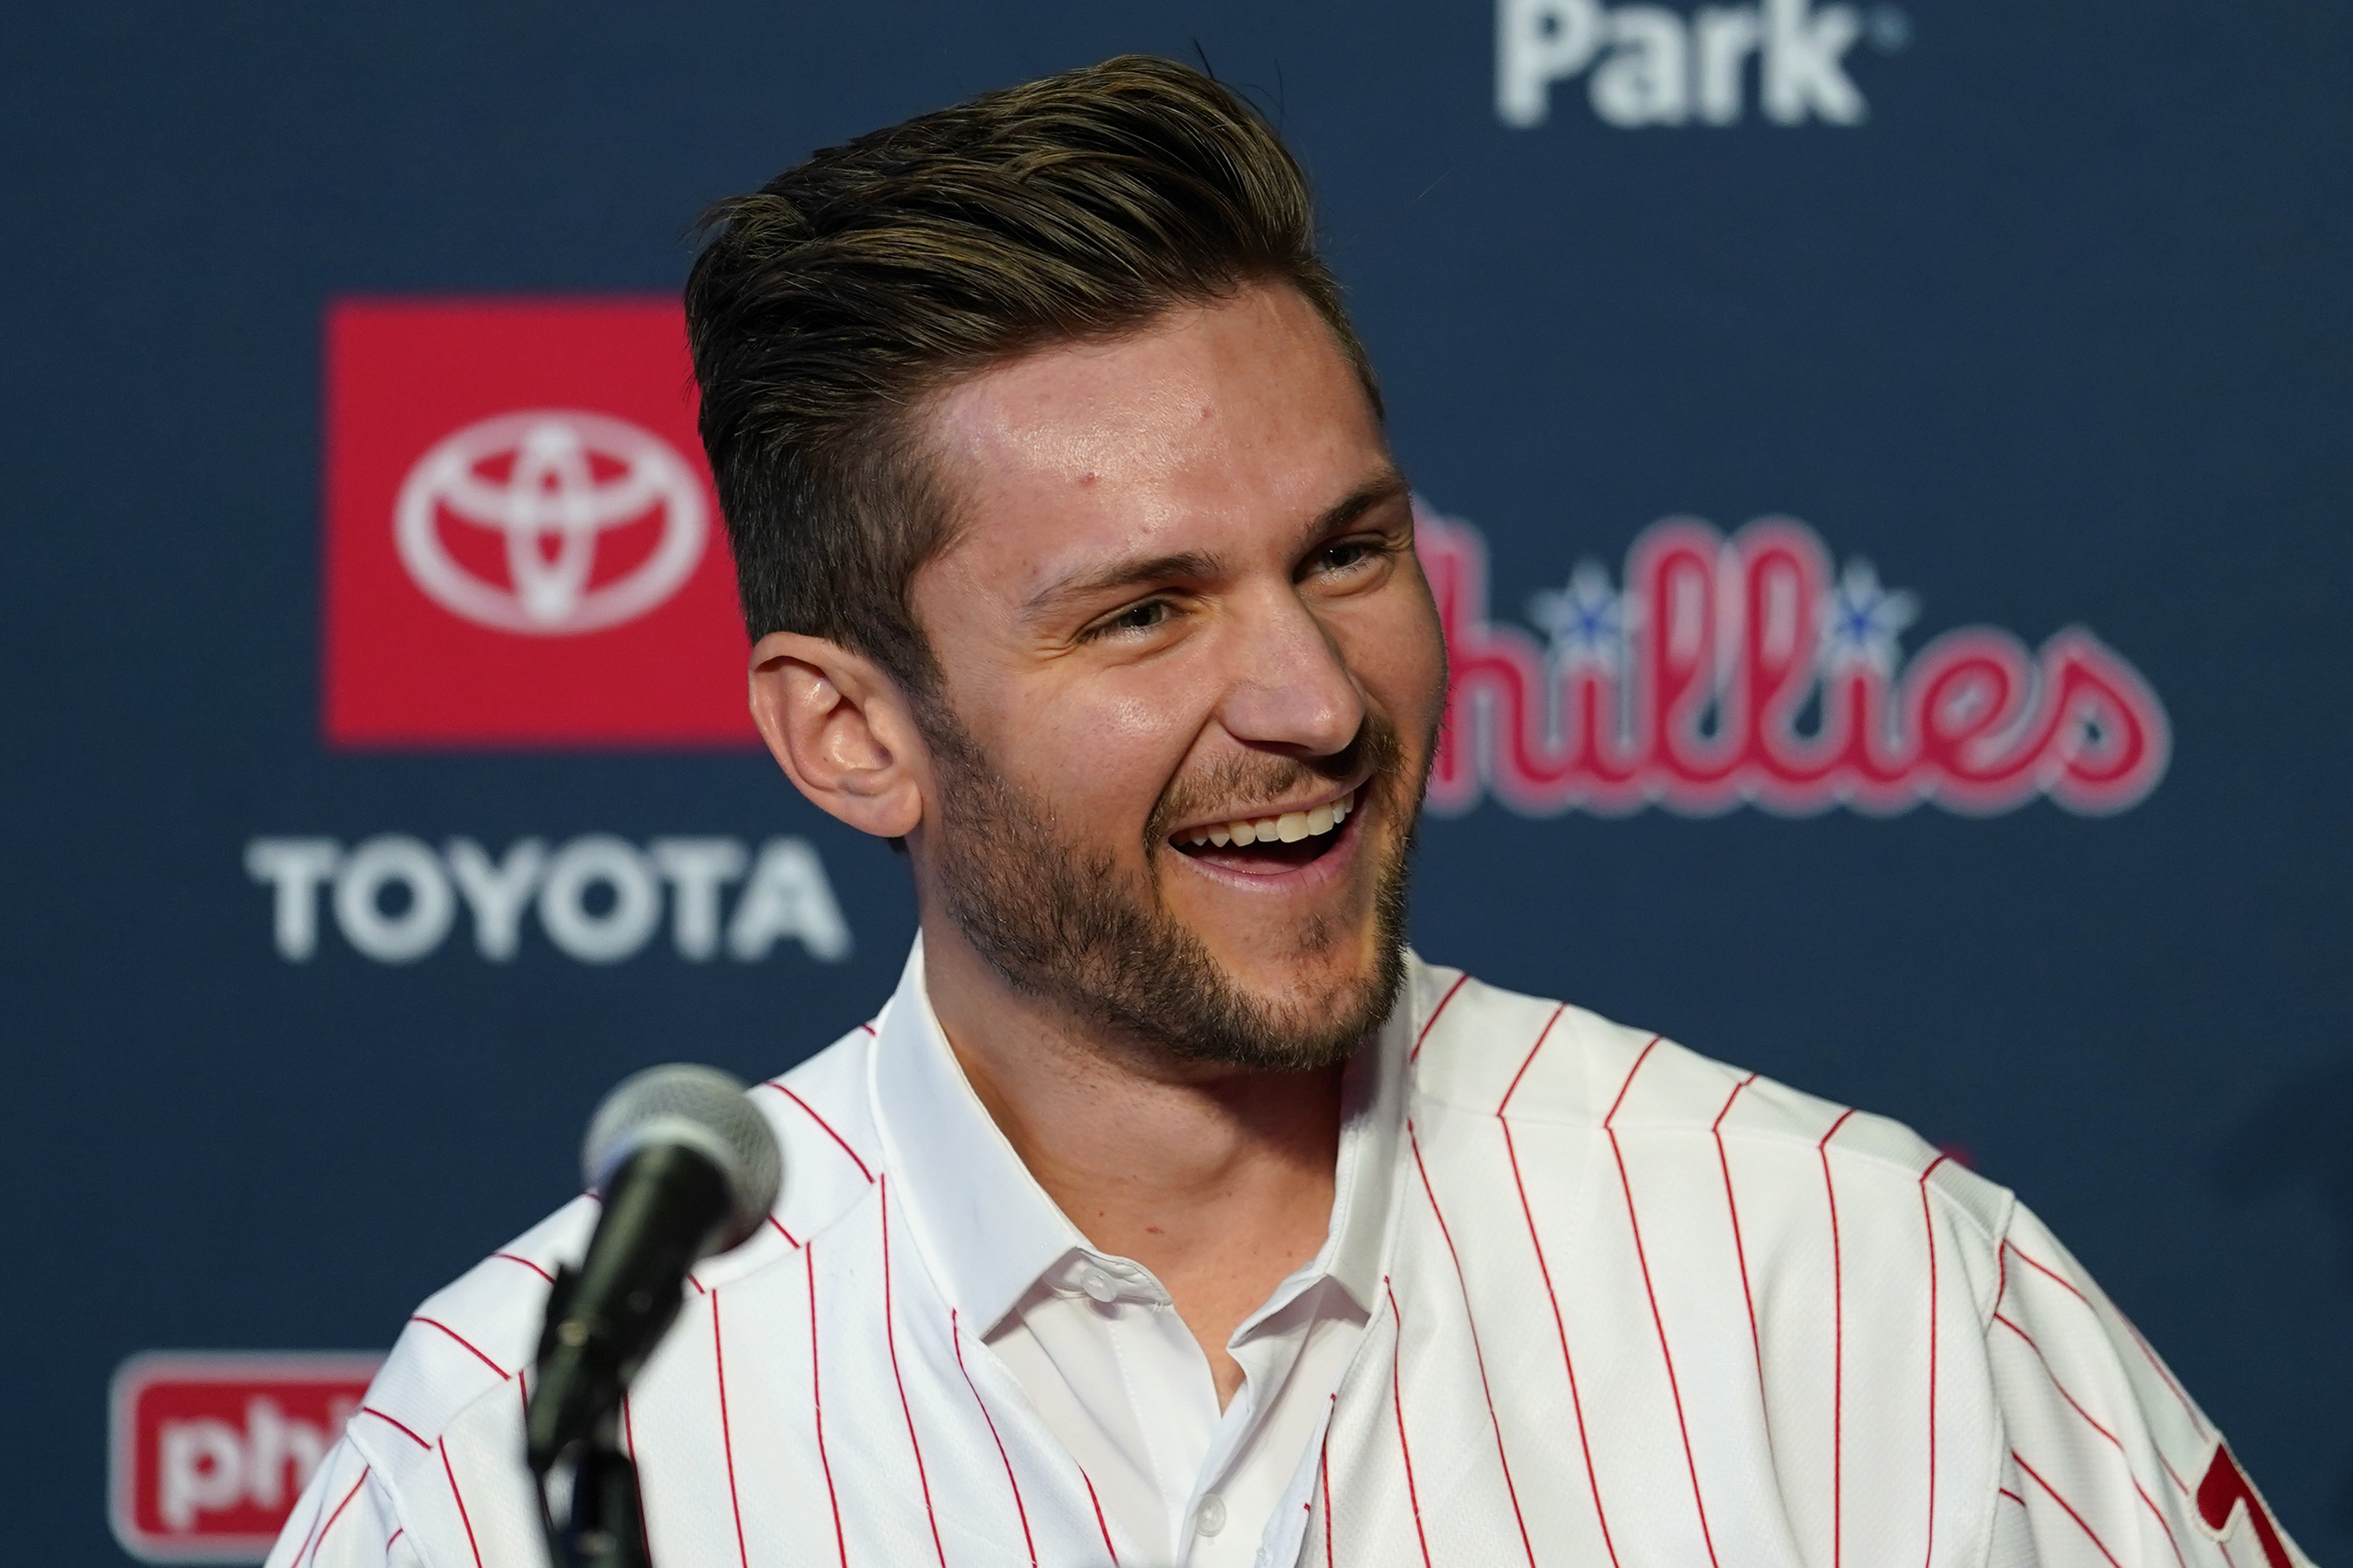 How Trea Turner's $300M deal impacts Phillies, Dodgers, free-agent